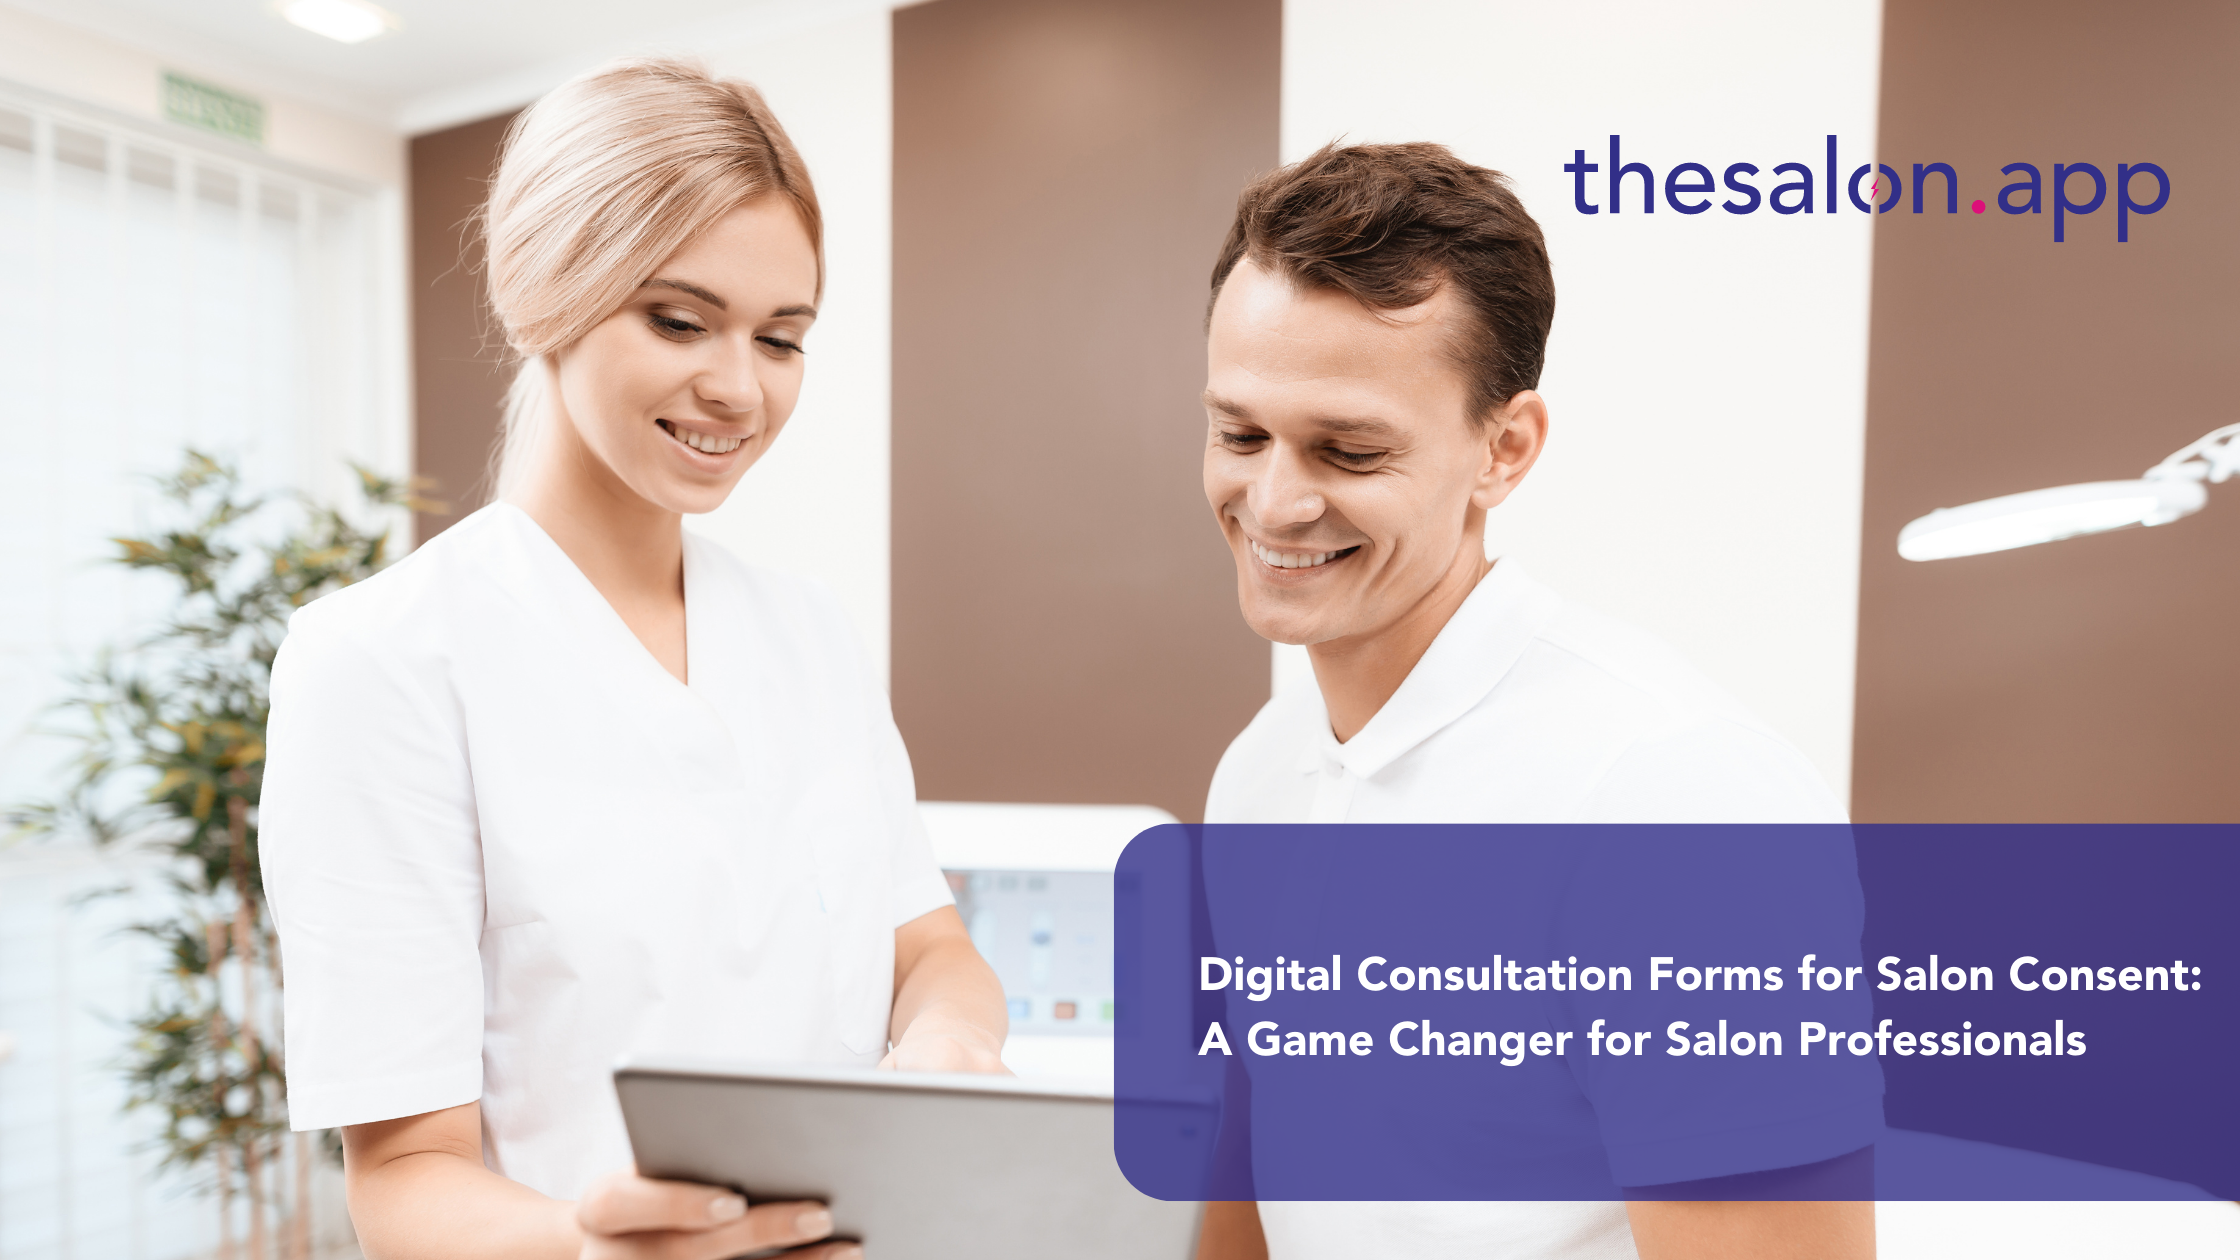 The power of Digital Consultation Forms for salon consent: A game changer for salon professionals